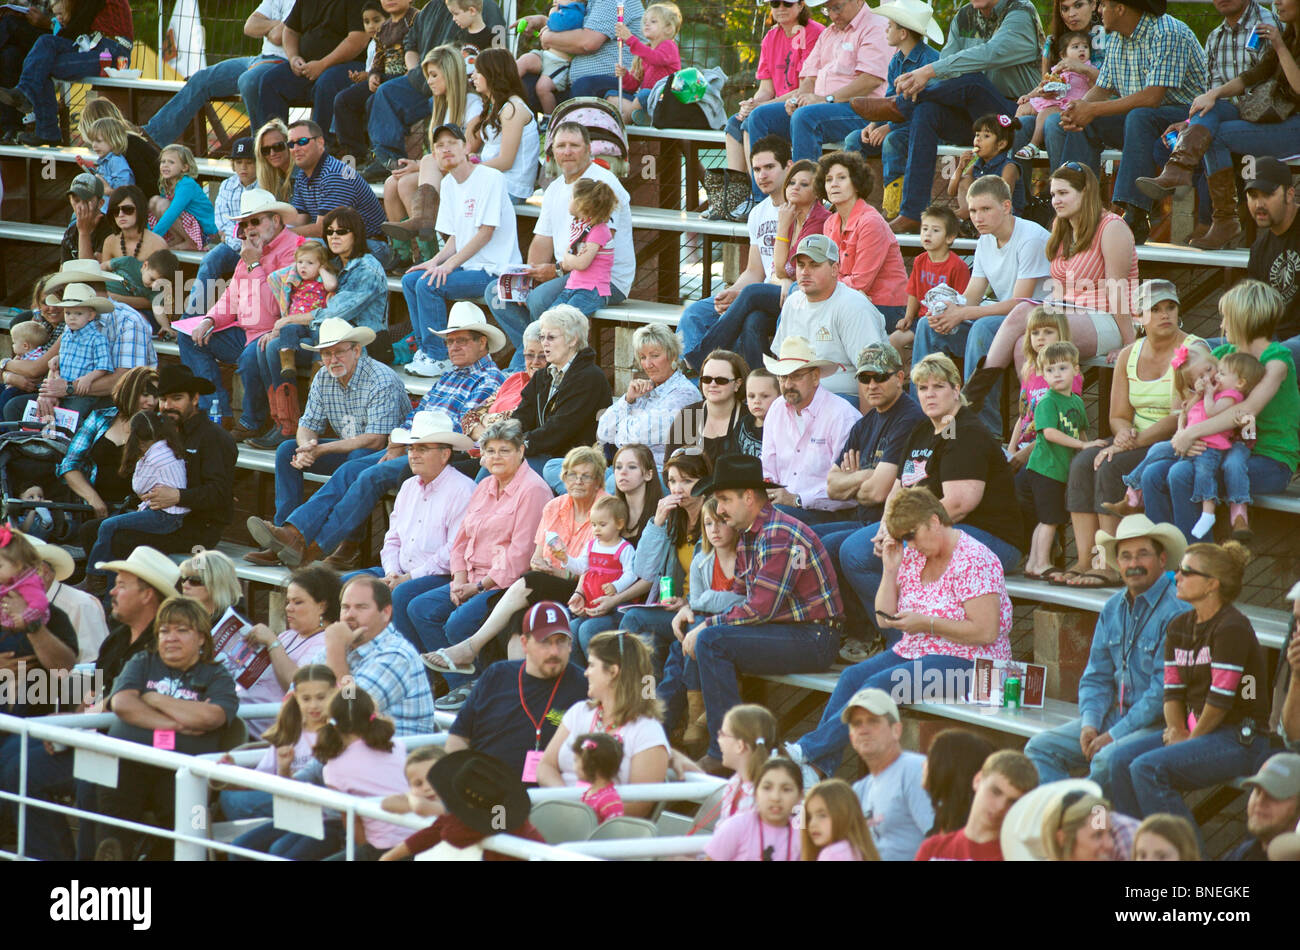 Rodeo fans gathered to support and watch PRCA Event  in Texas, USA Stock Photo